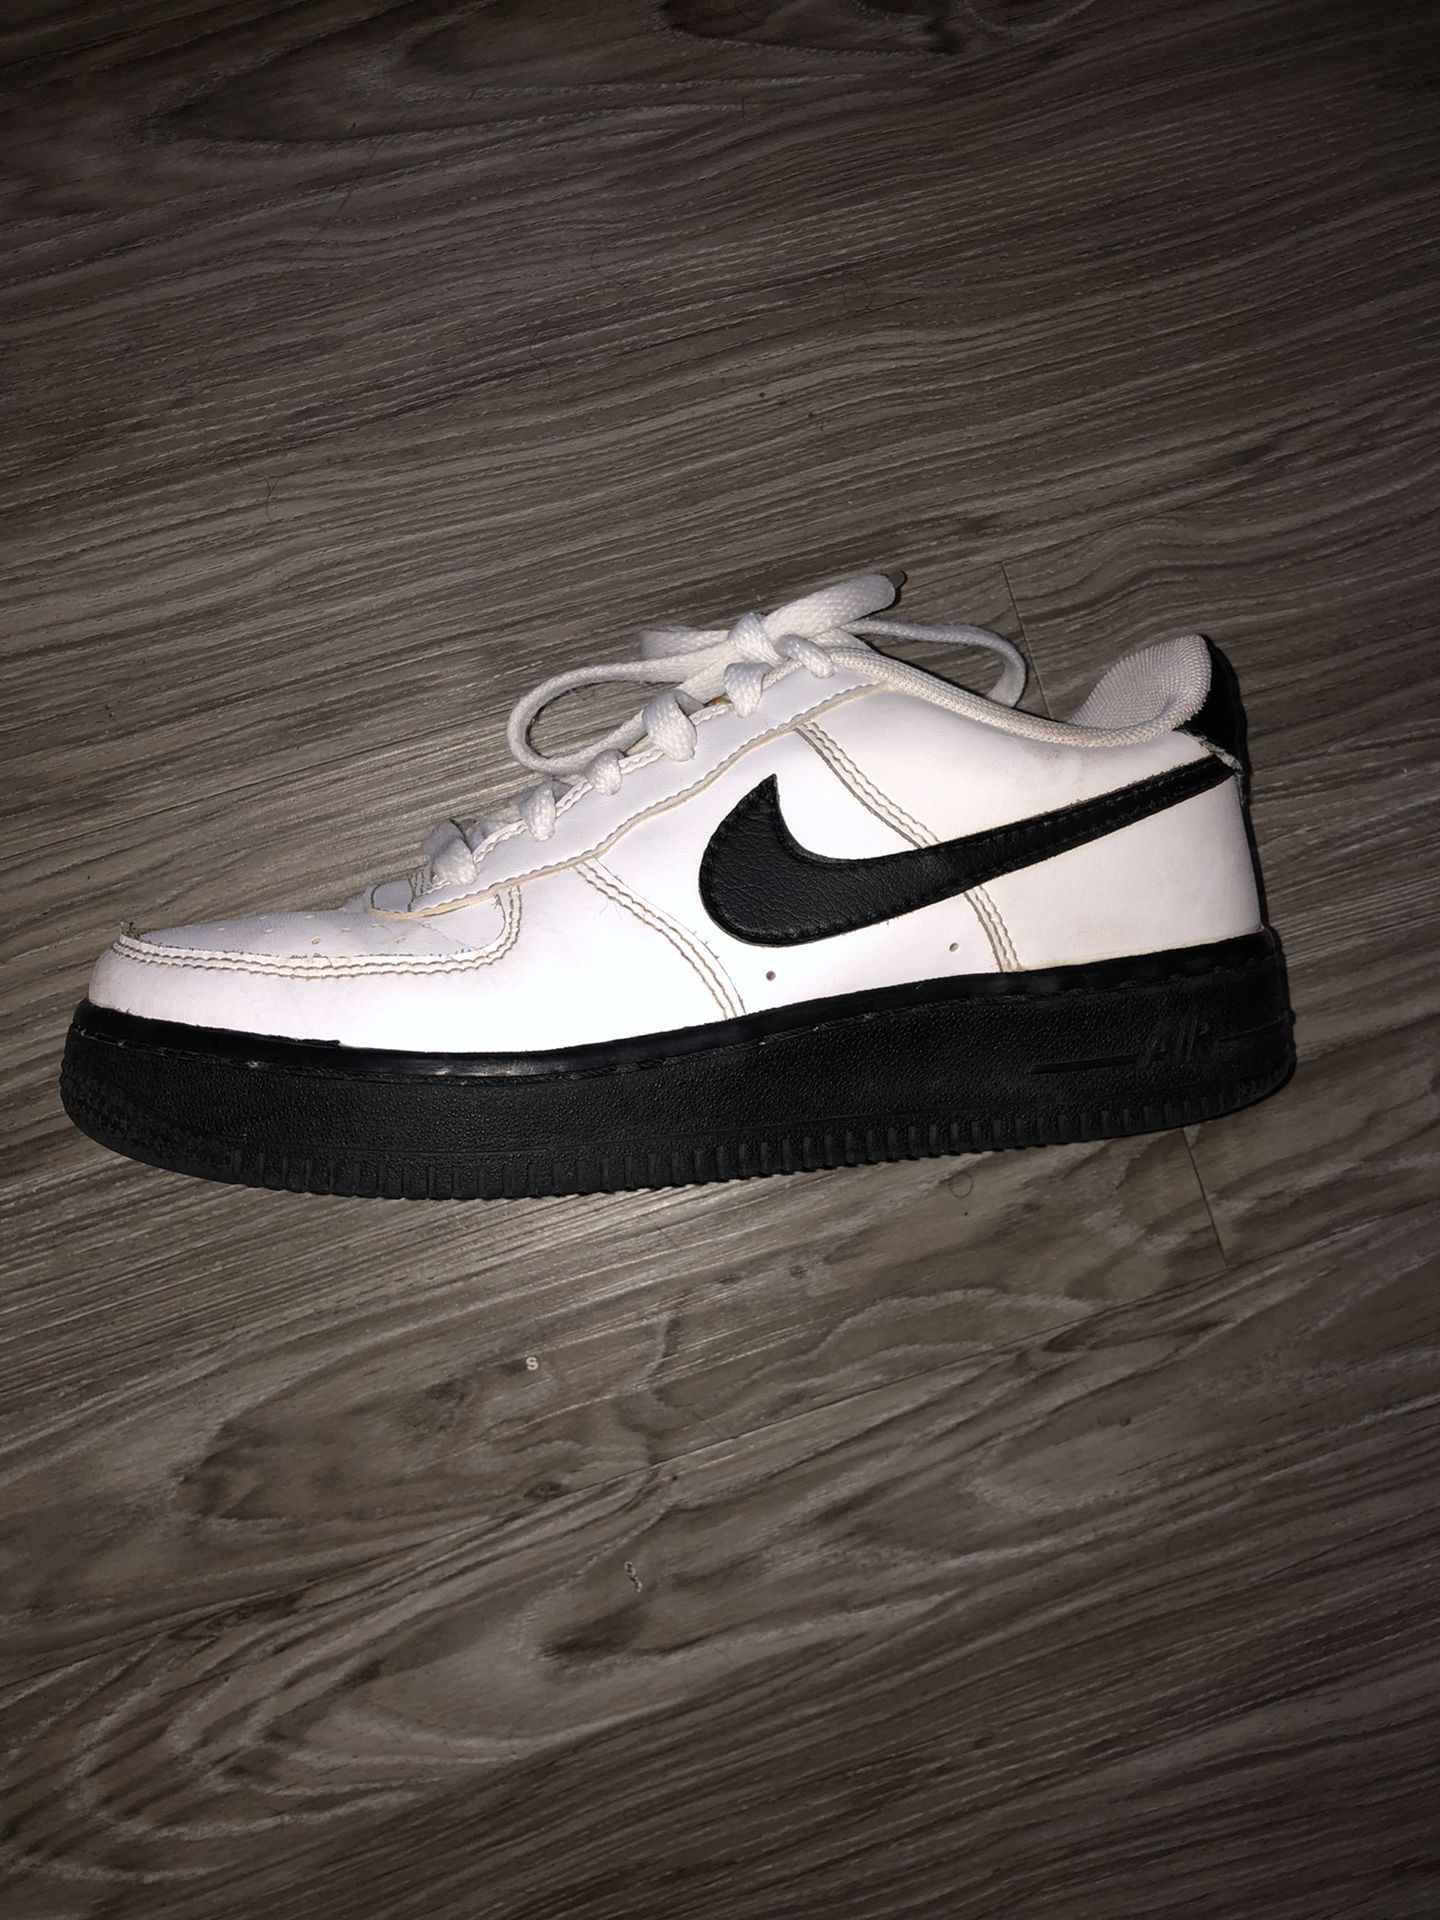 Nike Air Force 1 Blue X Louis Vuitton Size 10 Men for Sale in Burbank, CA -  OfferUp